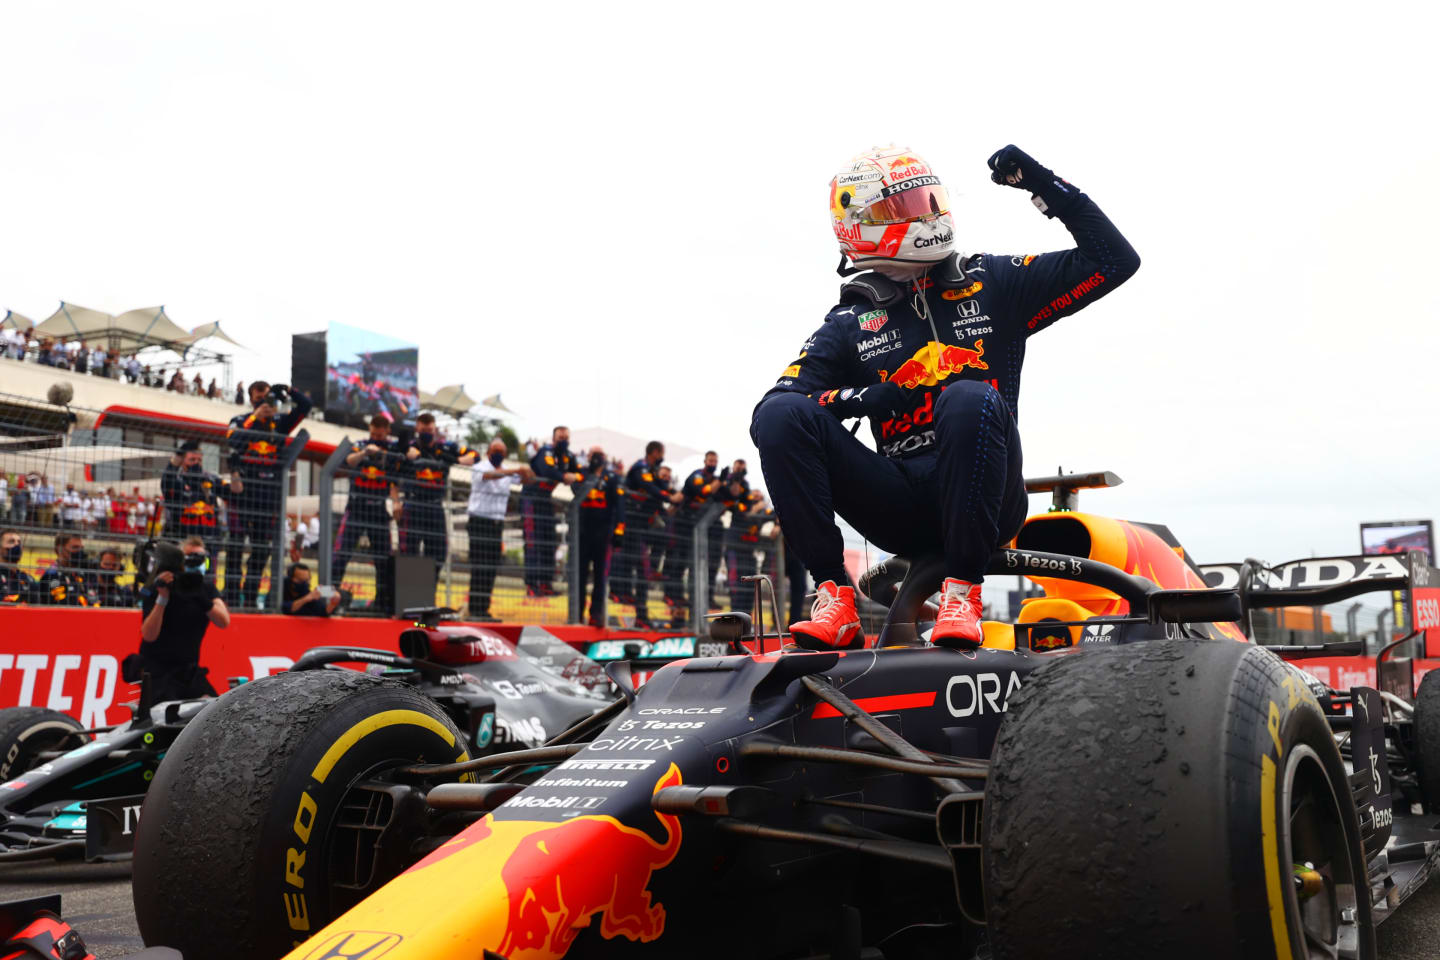 LE CASTELLET, FRANCE - JUNE 20: Race winner Max Verstappen of Netherlands and Red Bull Racing celebrates in parc ferme during the F1 Grand Prix of France at Circuit Paul Ricard on June 20, 2021 in Le Castellet, France. (Photo by Dan Istitene - Formula 1/Formula 1 via Getty Images)